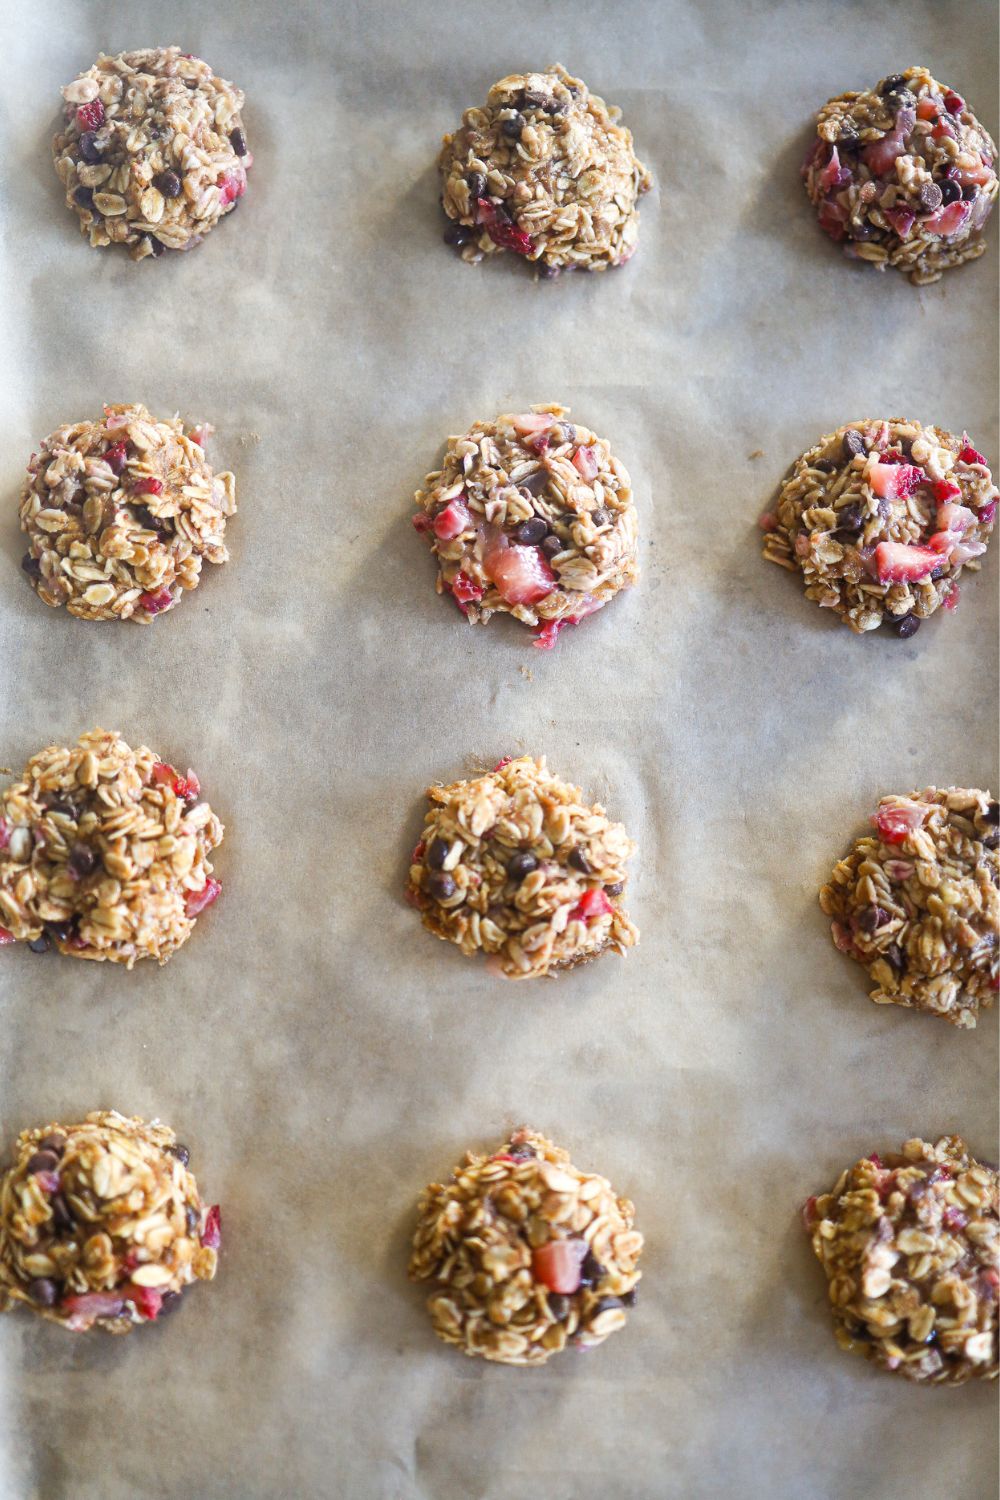 Strawberry oatmeal cookies directions